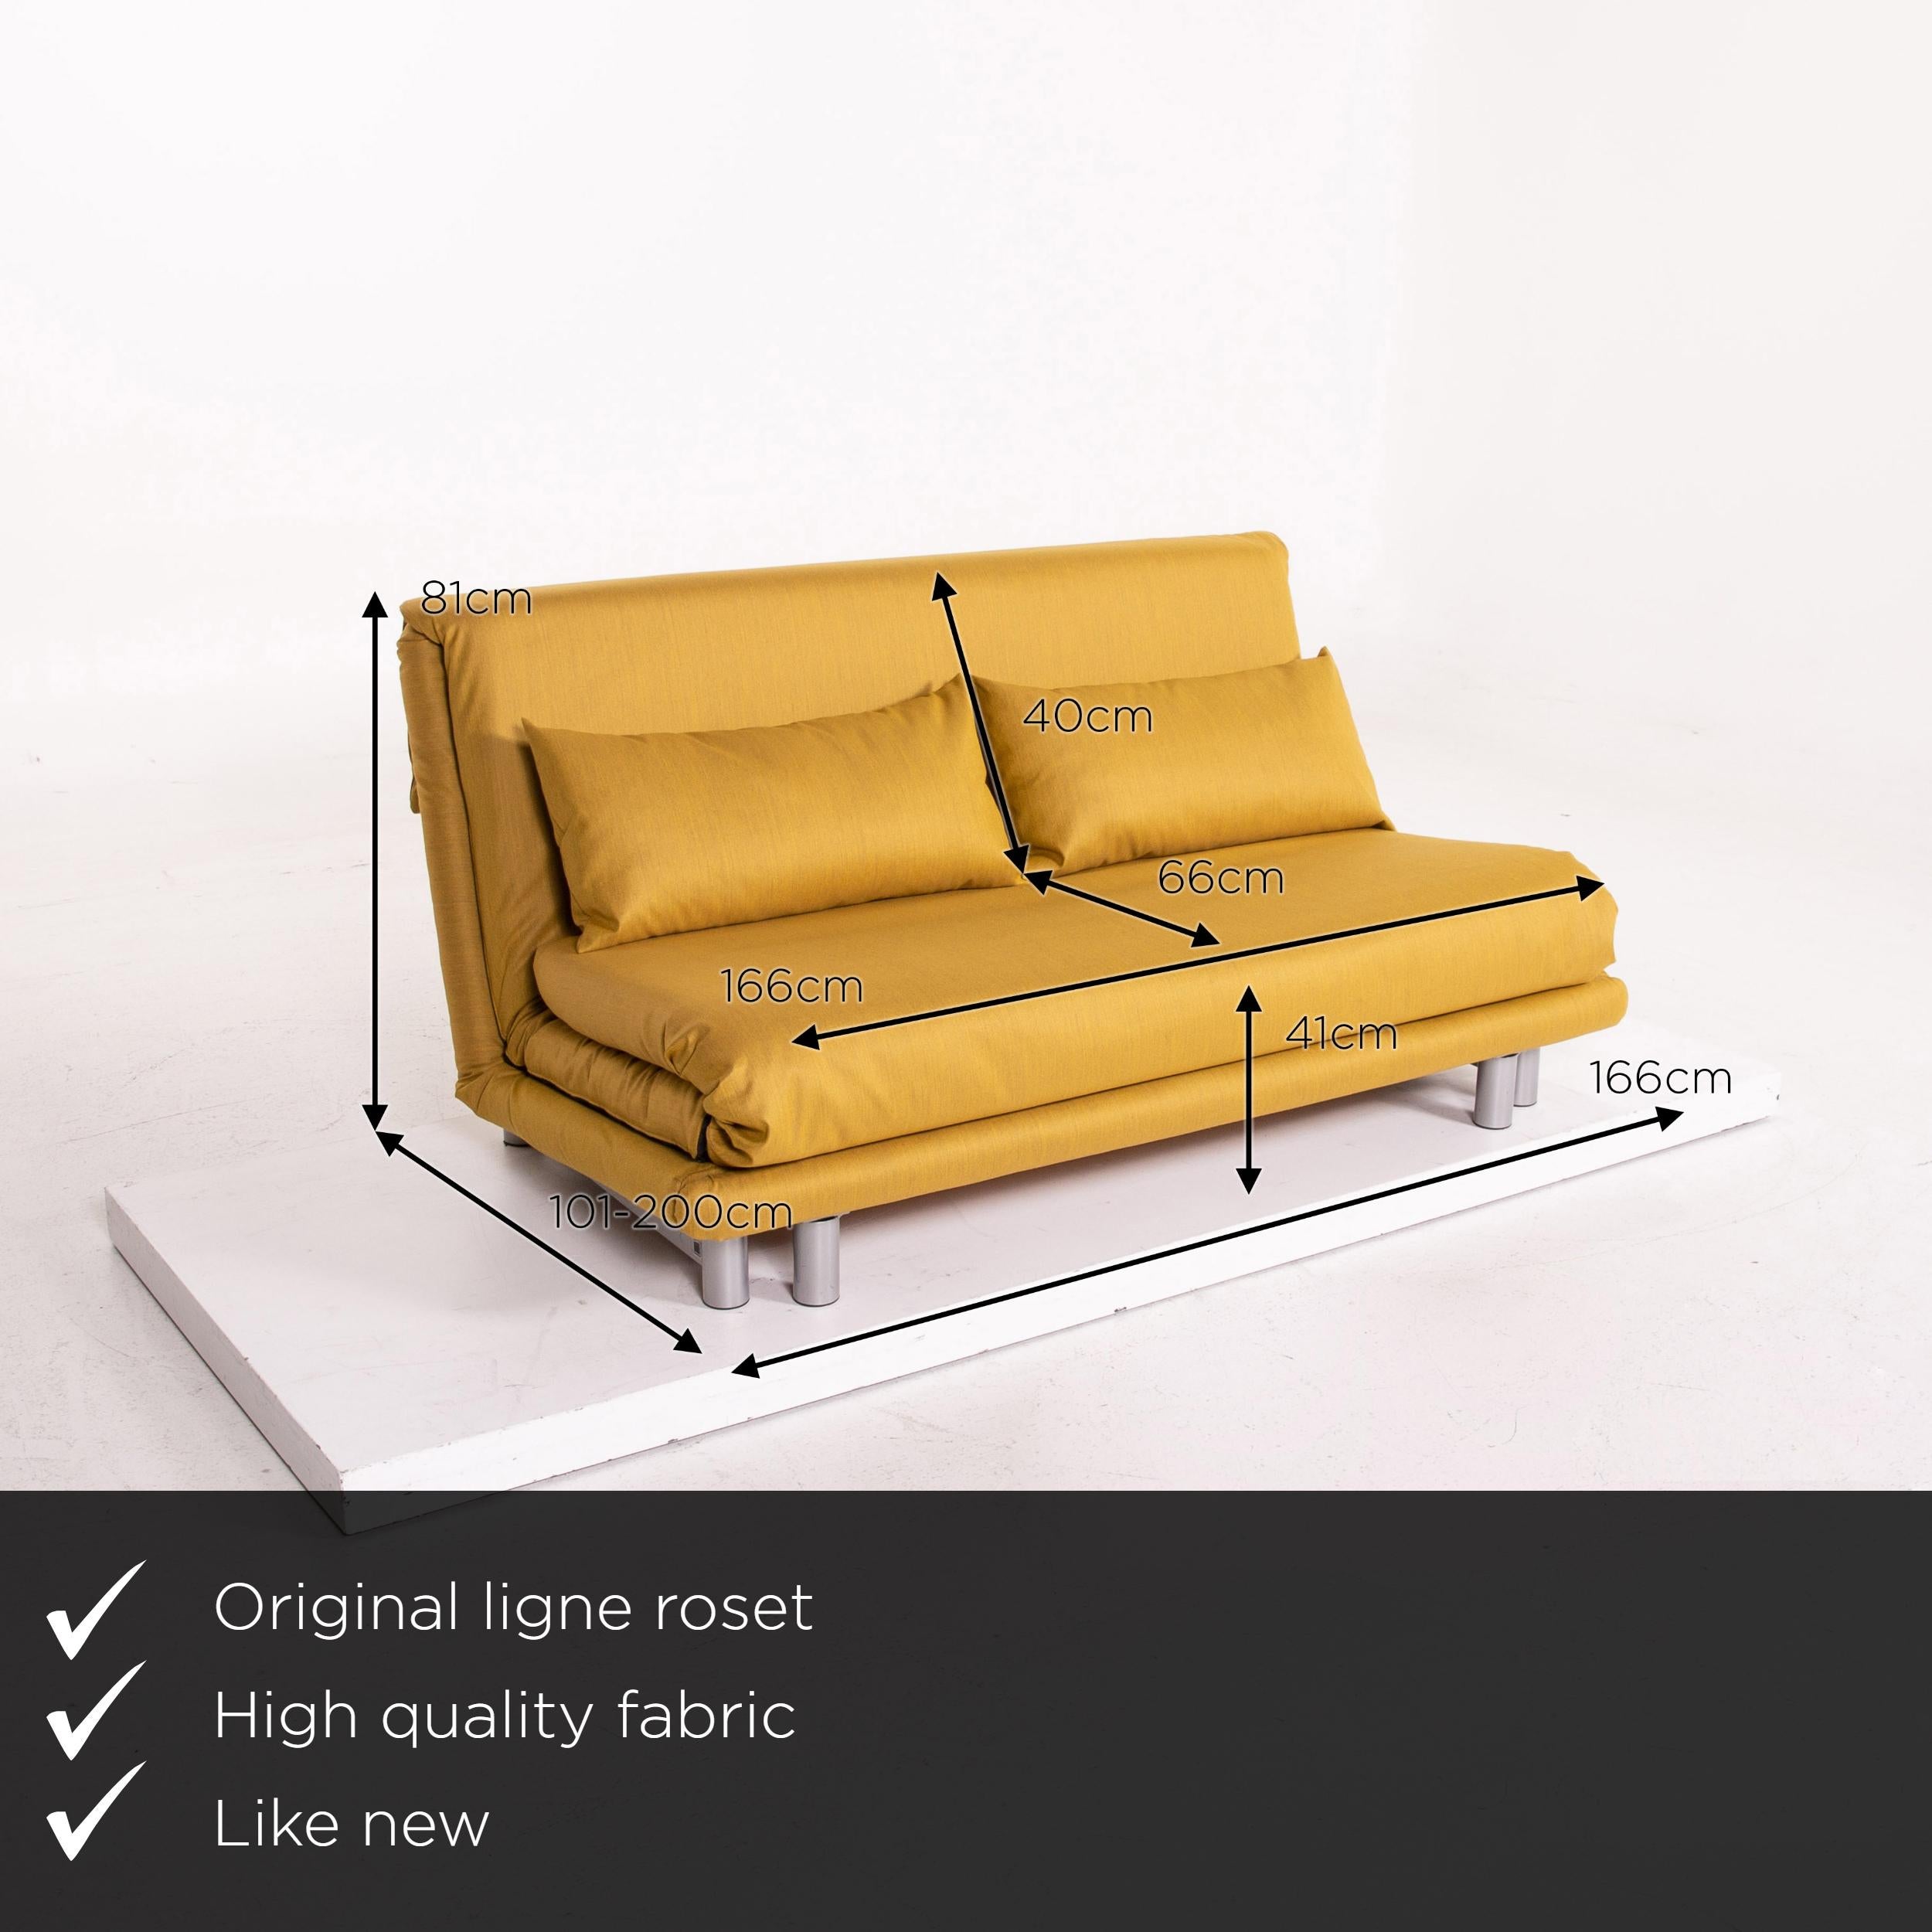 We present to you a Ligne Roset Multy fabric sofa bed yellow two-seat sofa sleep function couch.


 Product measurements in centimeters:
 

Depth 101
Width 166
Height 81
Seat height 41
Rest height
Seat depth 66
Seat width 166
Back